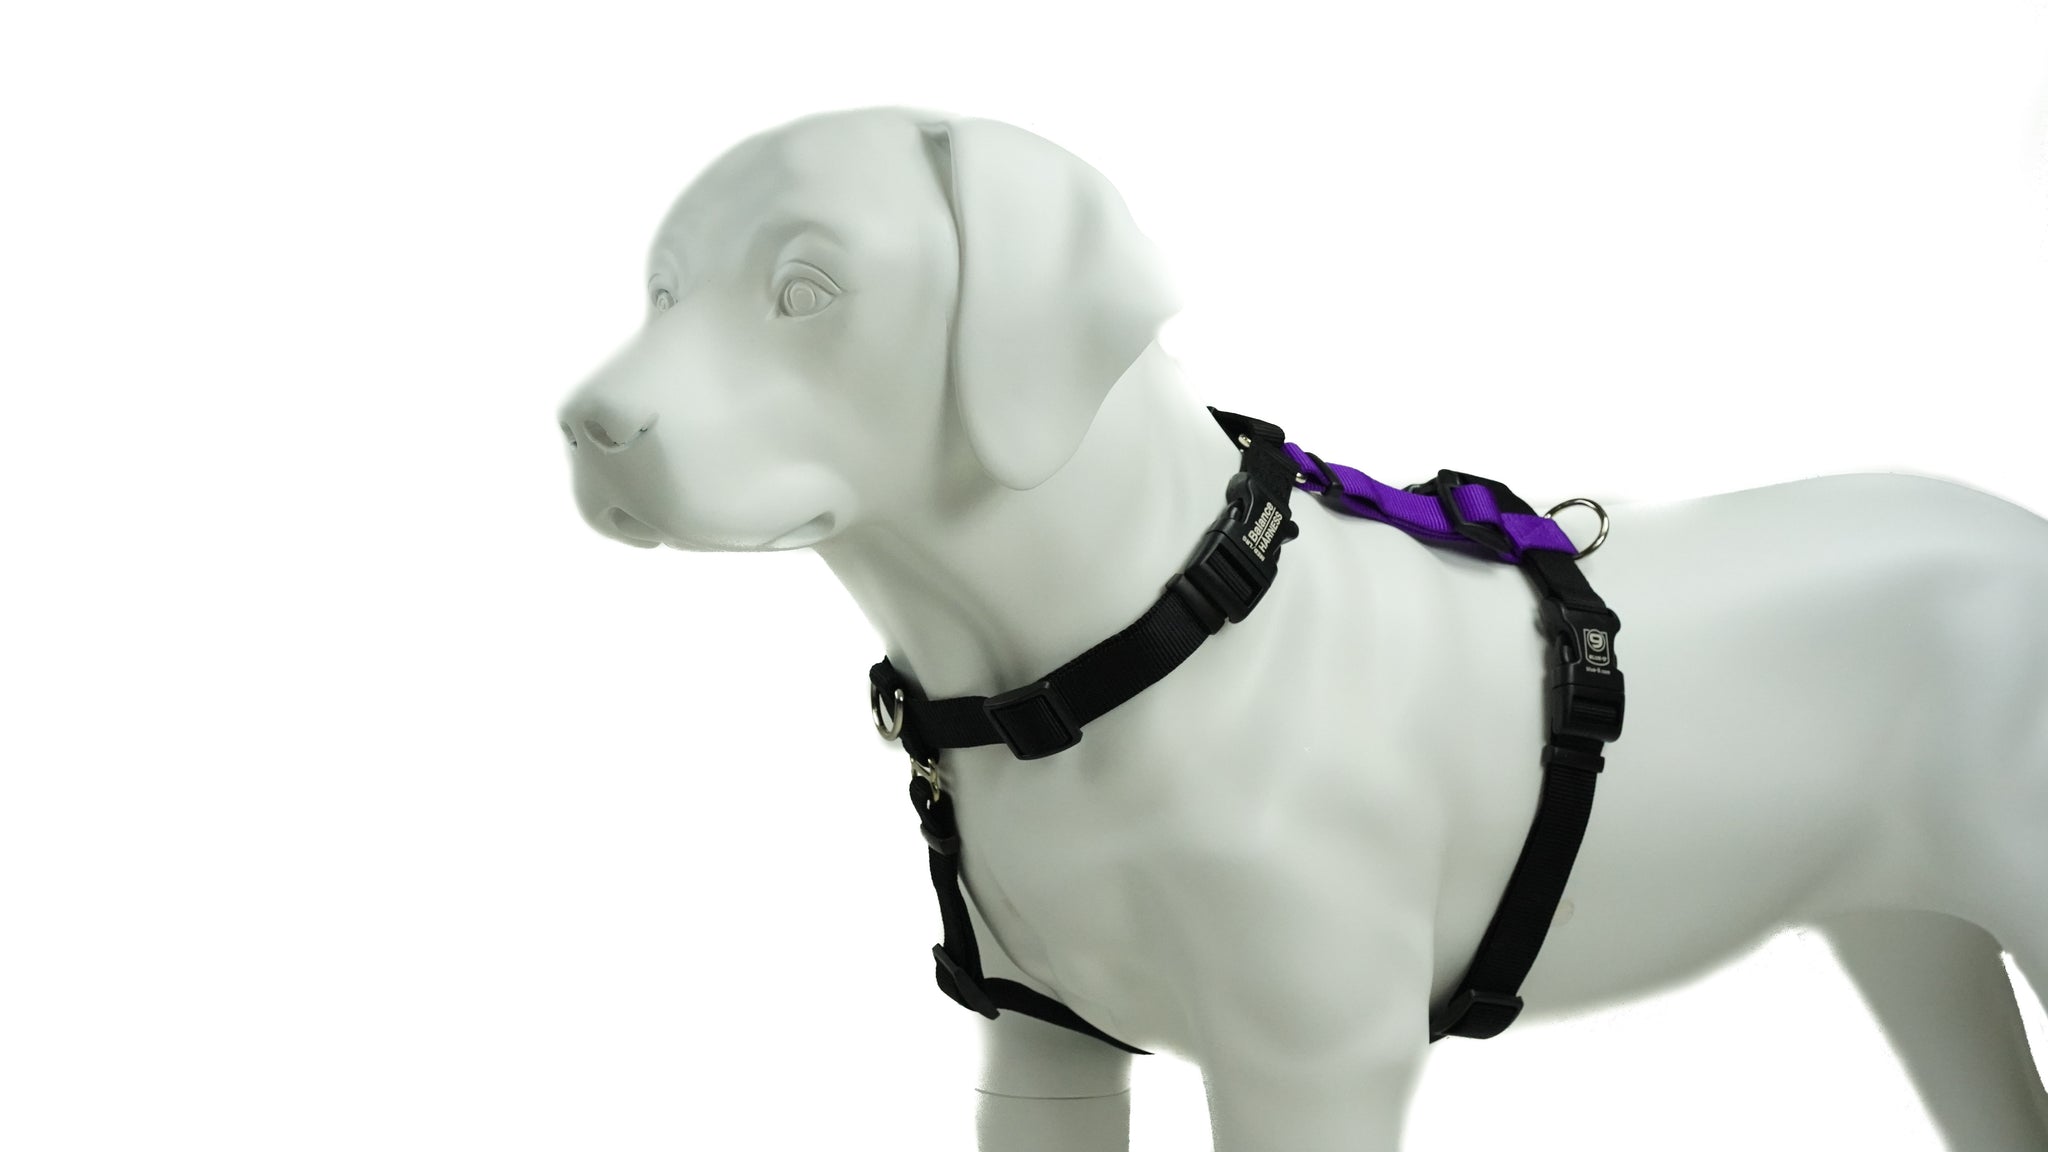 Symmetry Line: All-in-One Double-Ended Dog Leash 16 Feet 1/2 inch - Grisha  Stewart Dog Store